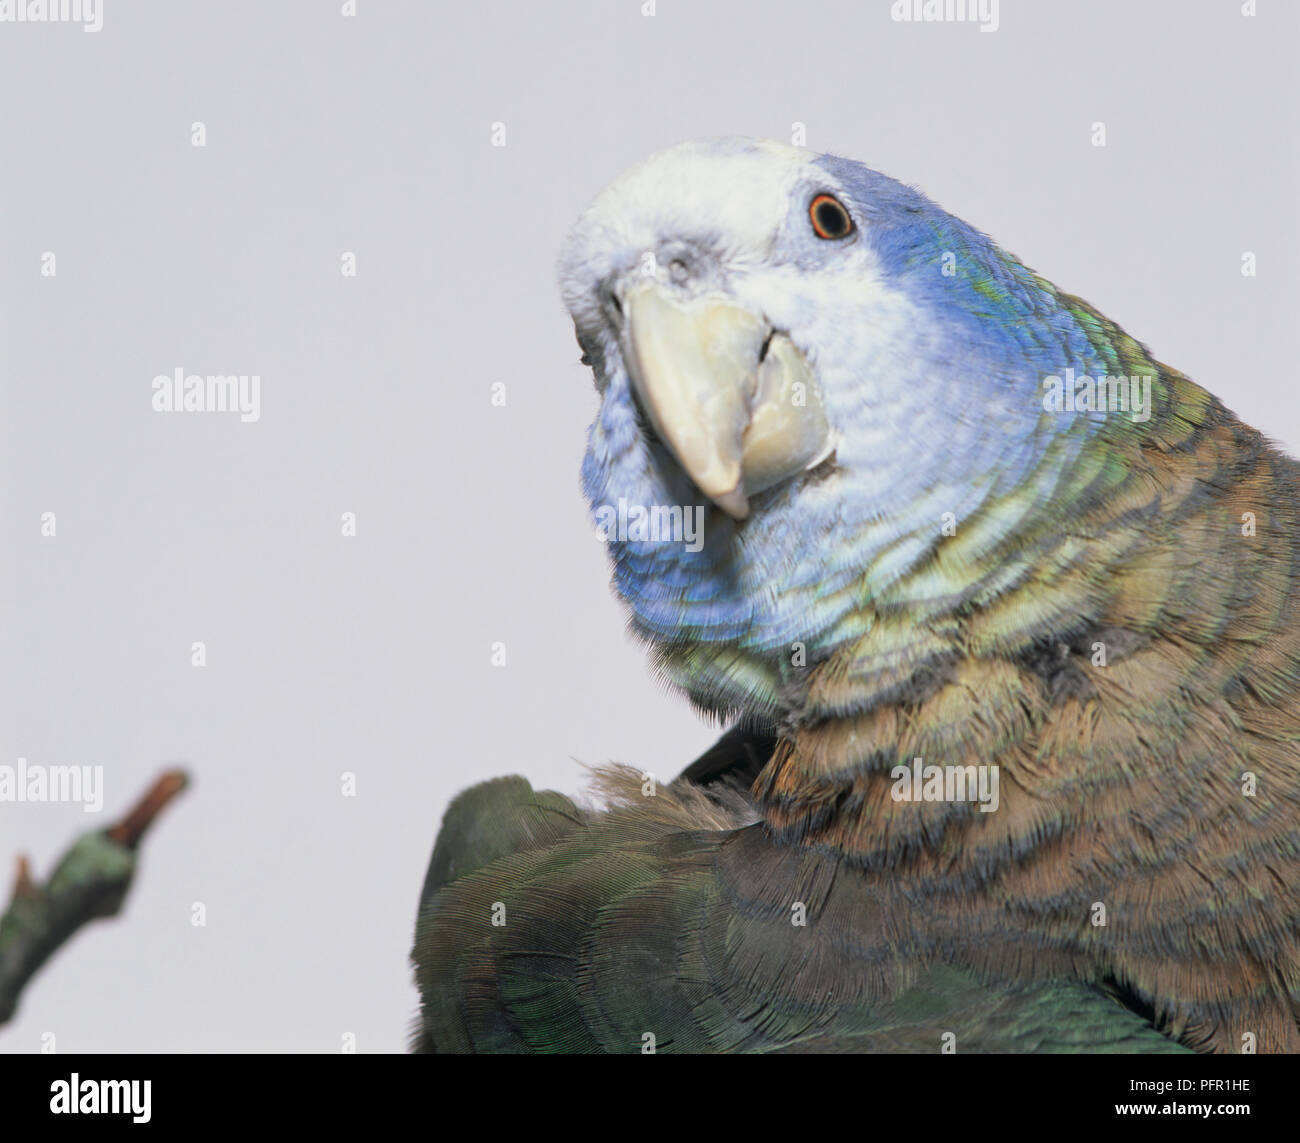 Head of St. Vincent Parrot (Green Phase), close-up Stock Photo